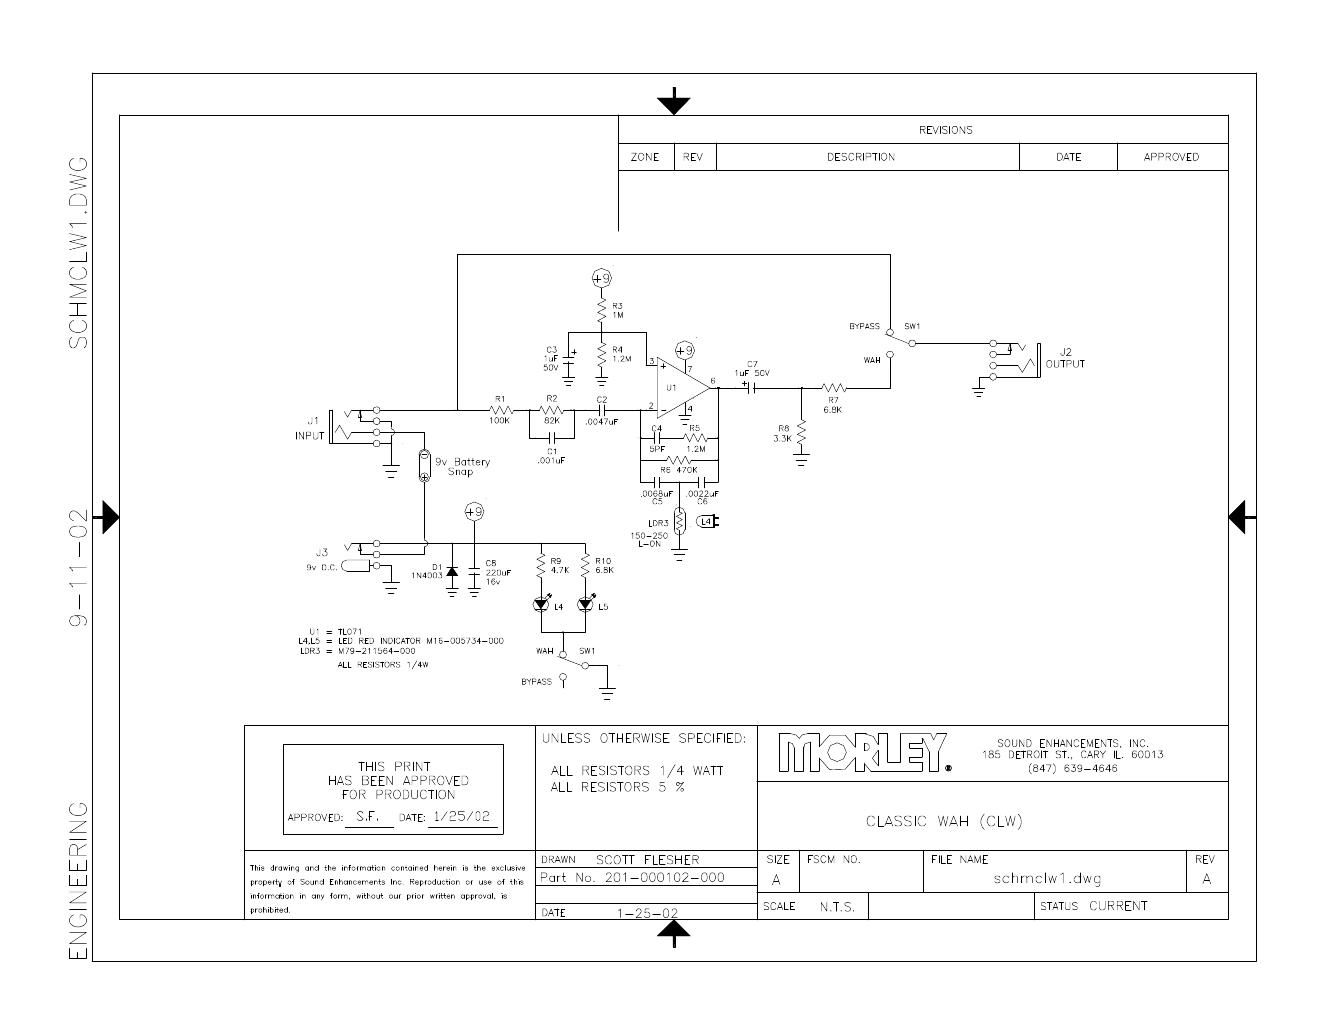 Morley CLW Classic Wah Schematic